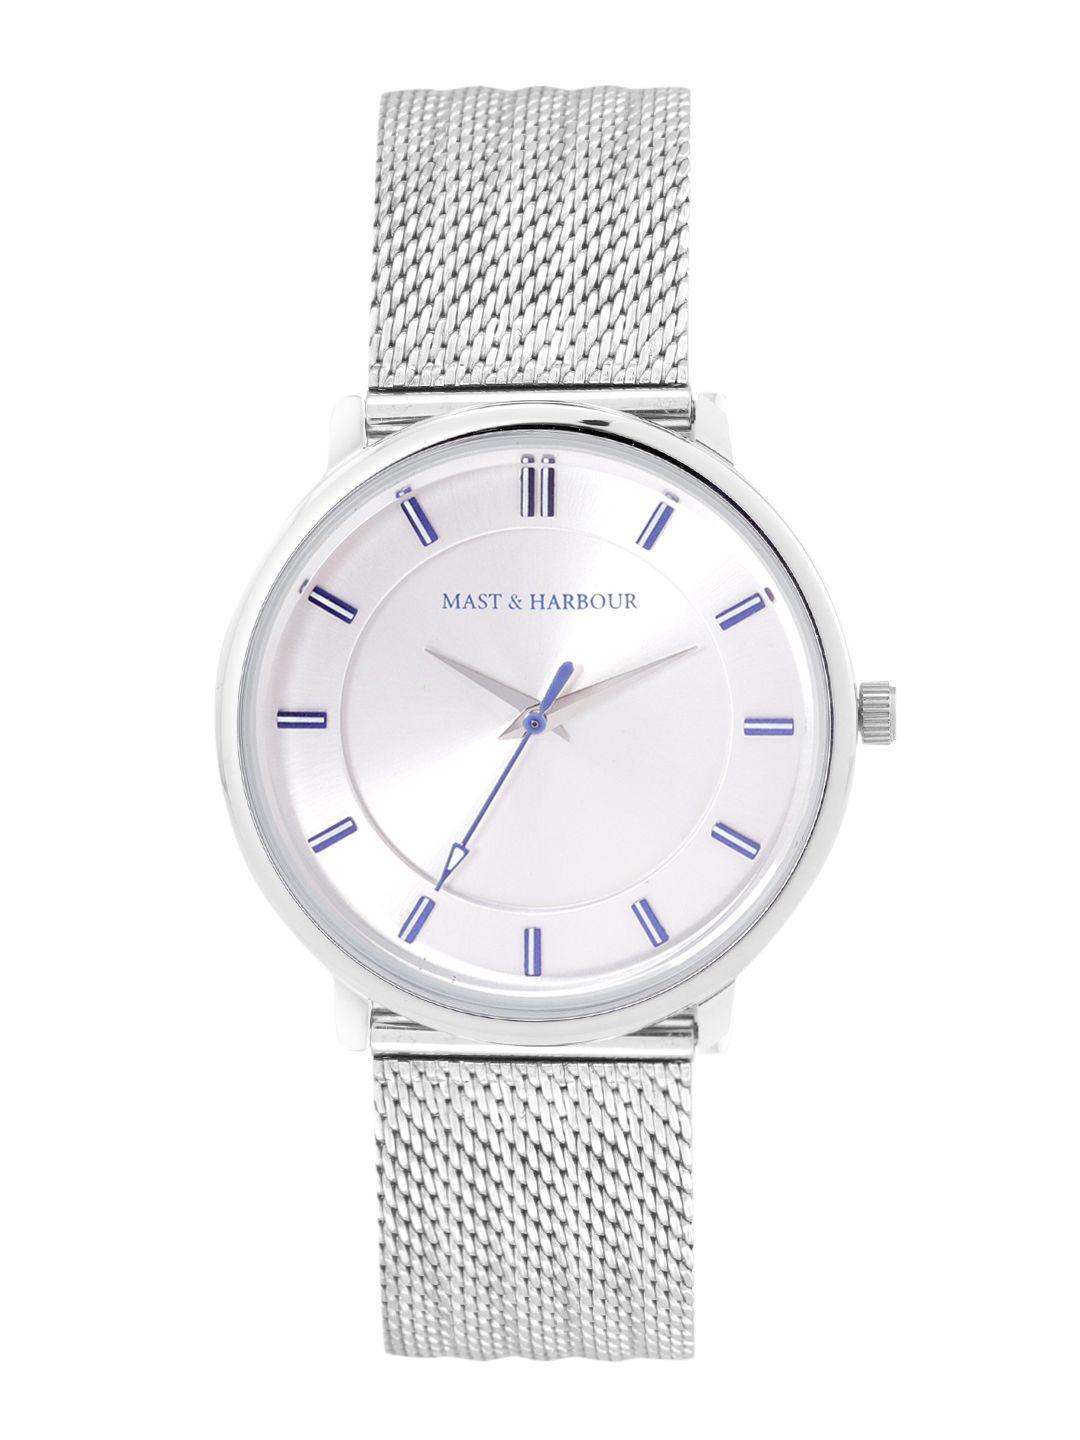 mast-&-harbour-unisex-silver-toned-brass-dial-&-silver-toned-stainless-steel-bracelet-style-straps-analogue-watch